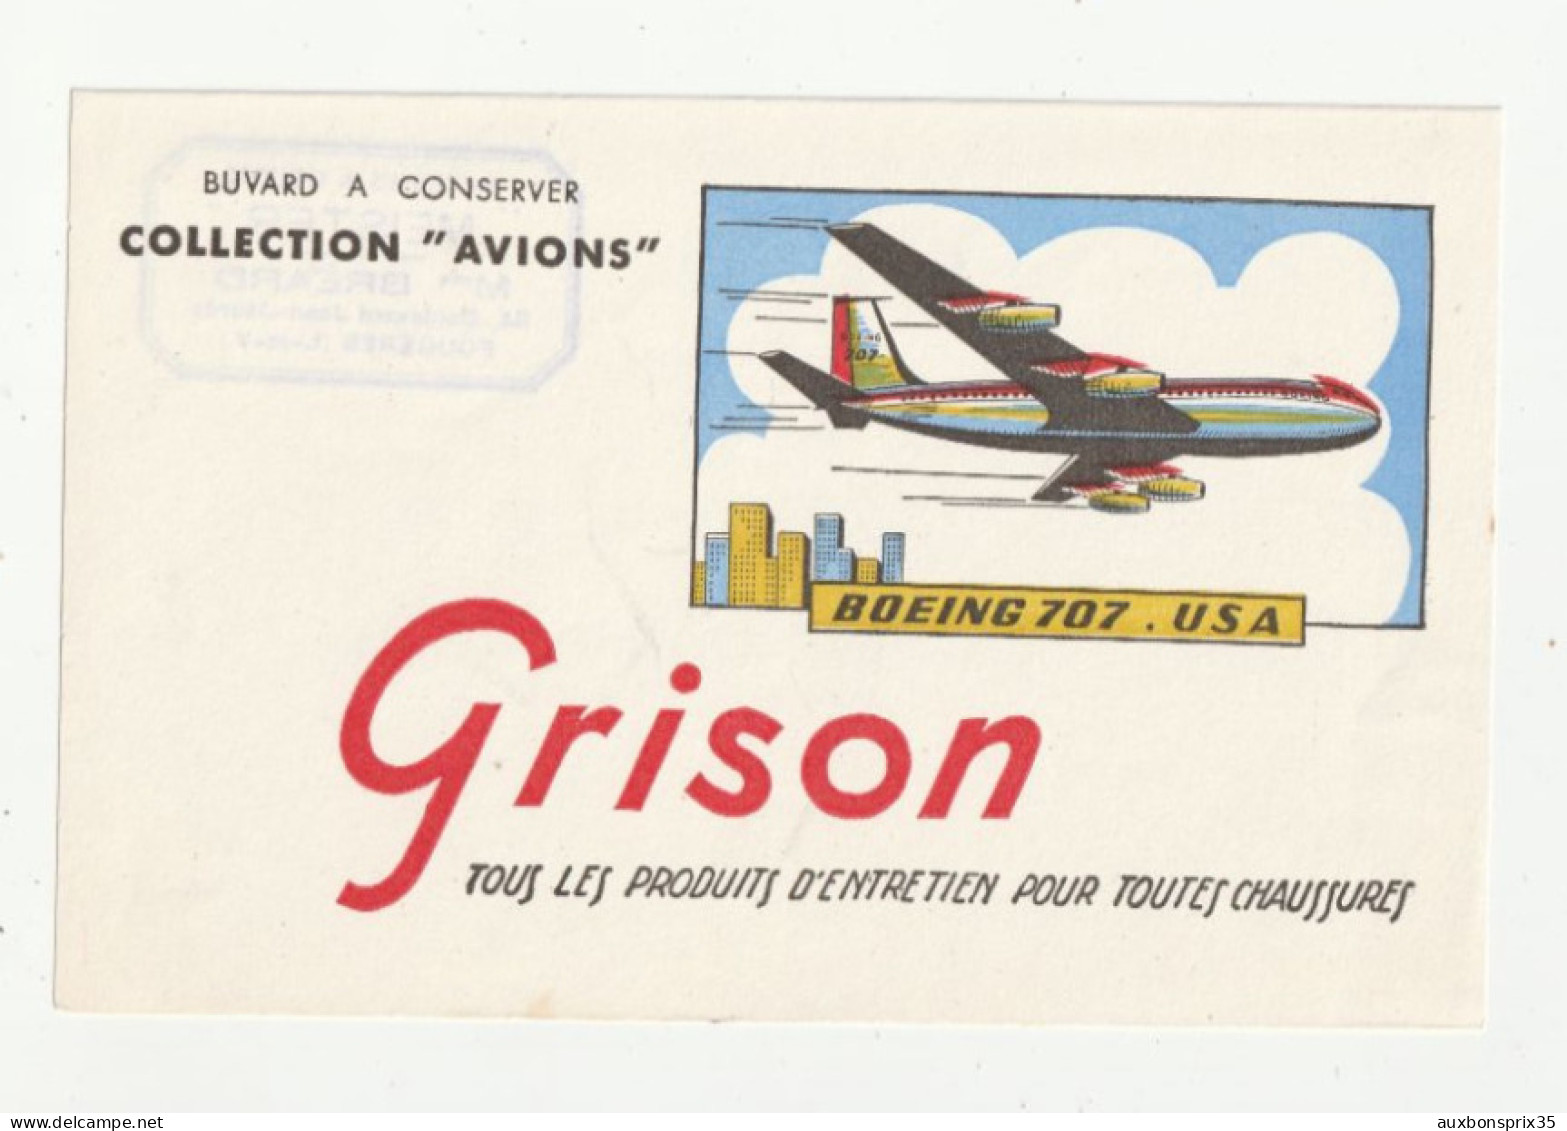 BUVARD - GRISON - COLLECTION AVIONS - BOEING 707 - (TAMPON DOS MEISTER MACHINE A COUDRE FOUGERES) 35 - Chaussures